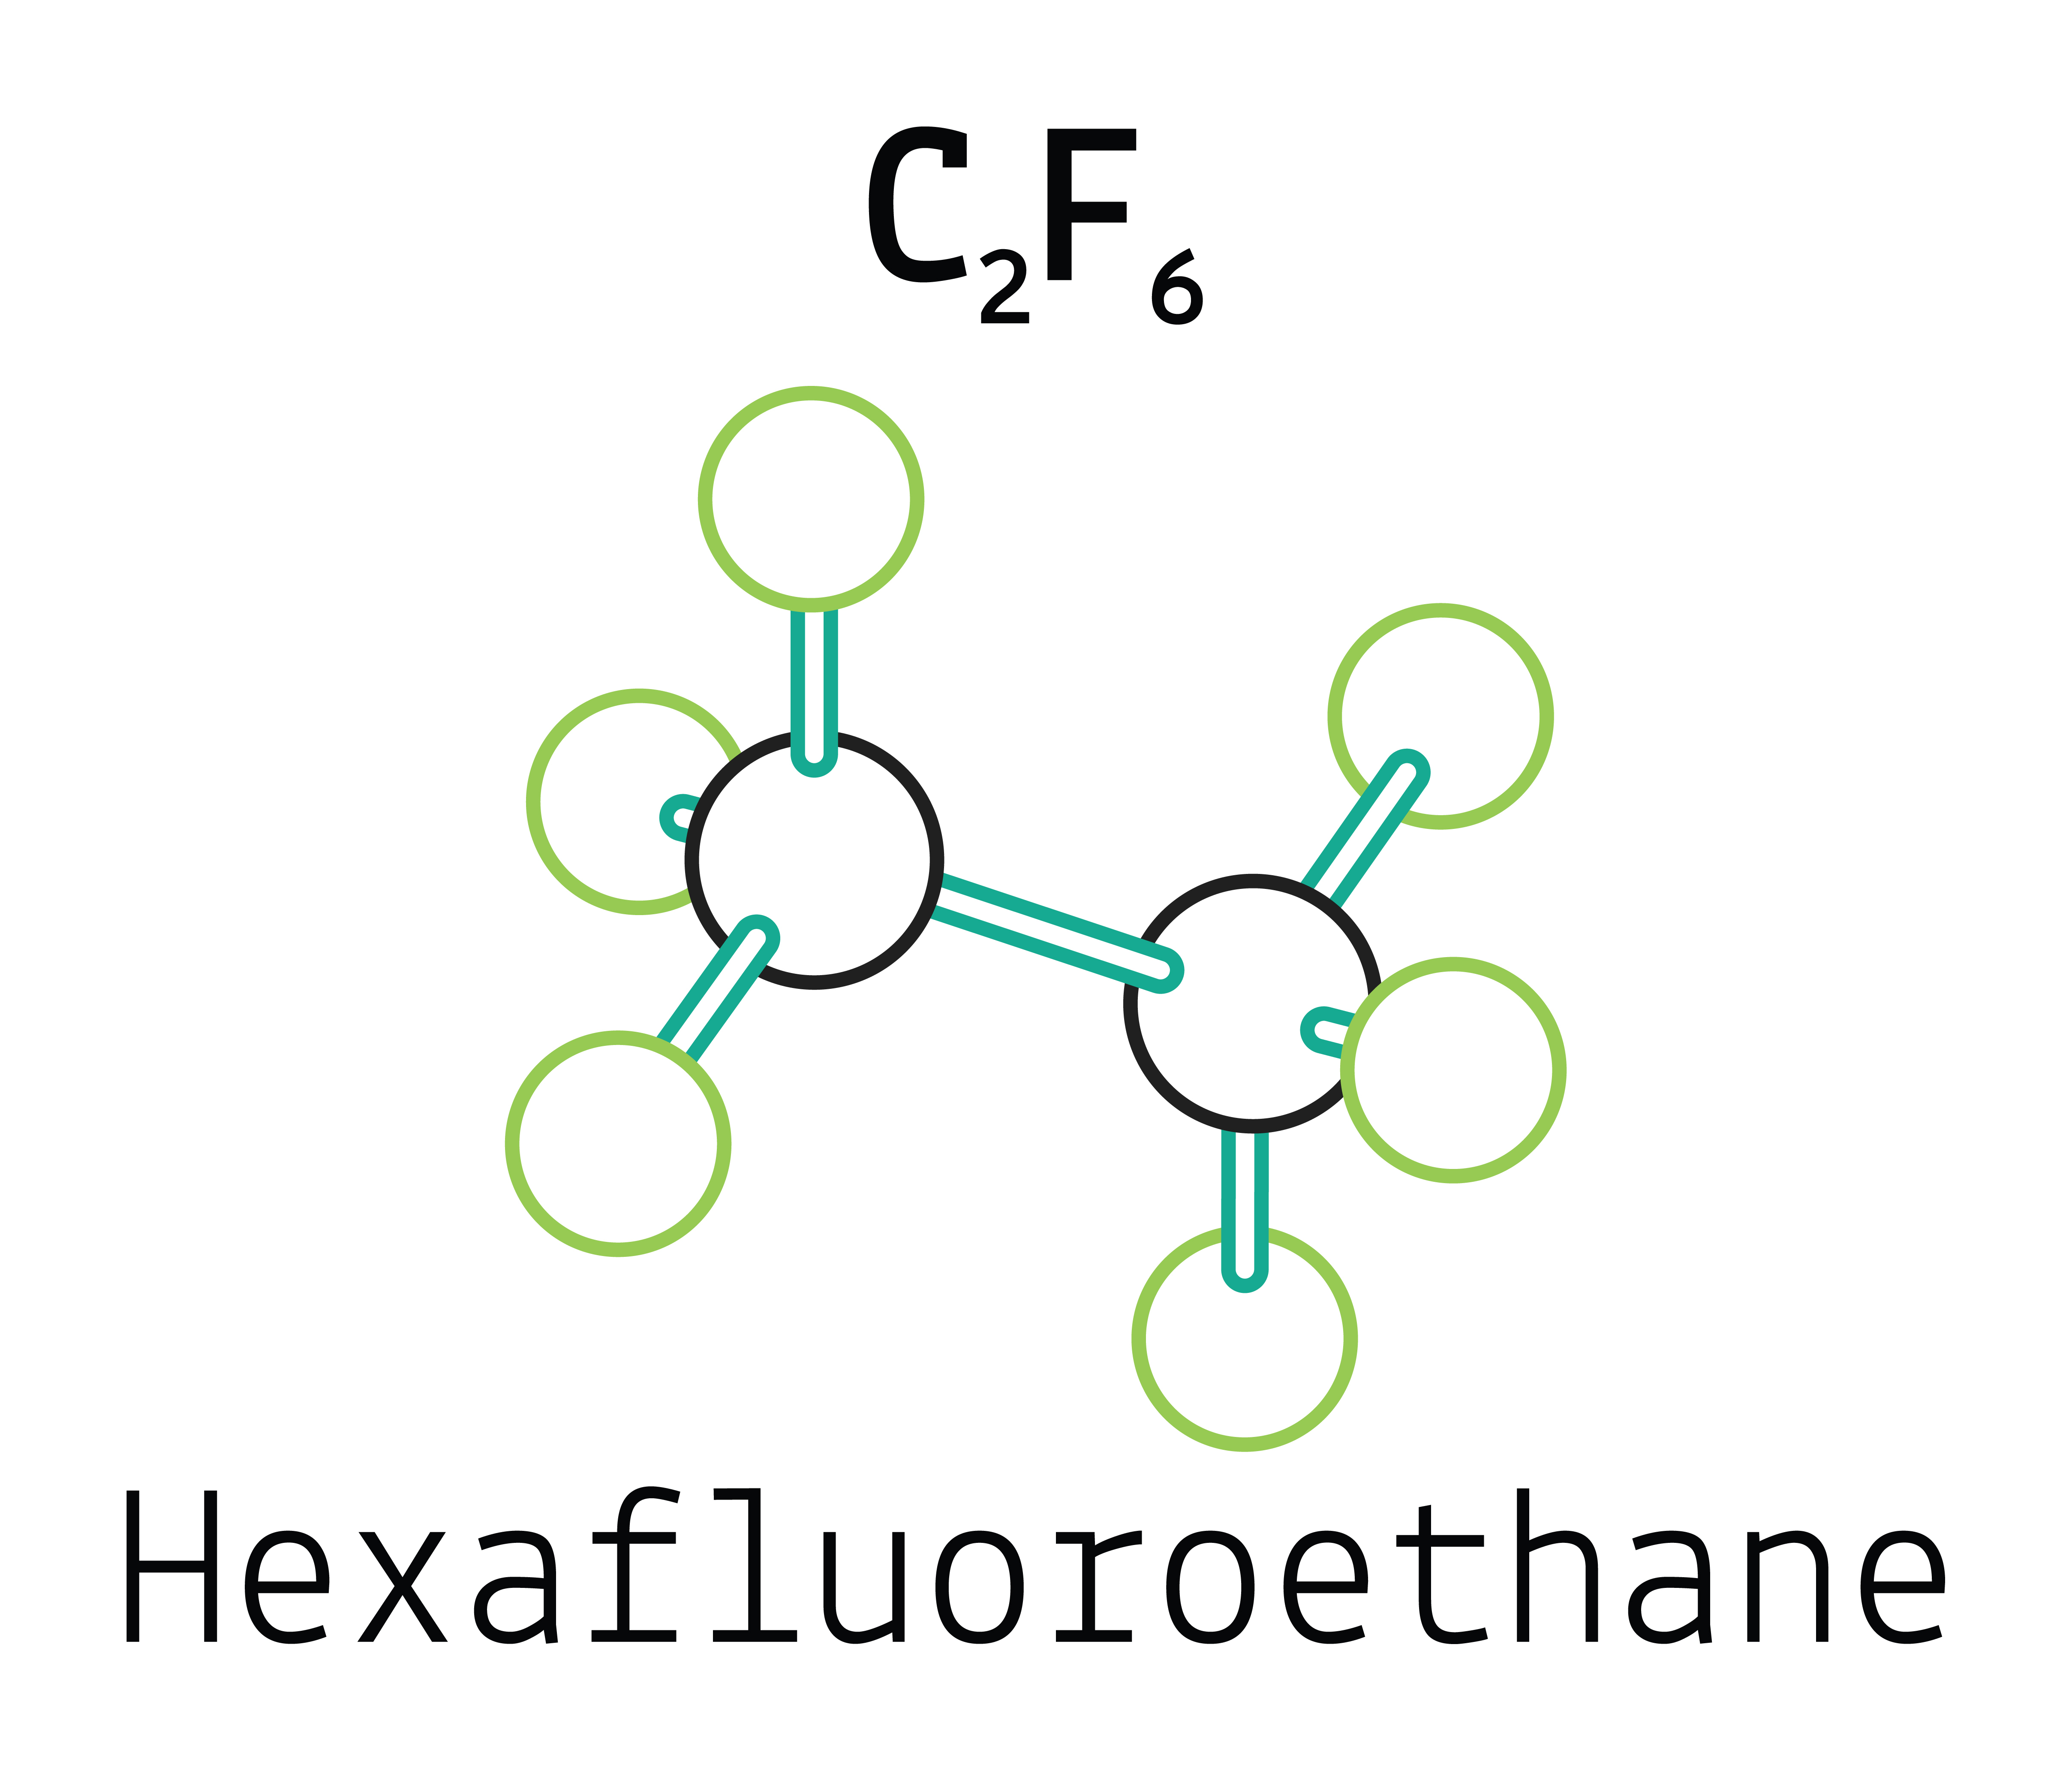 Hexafluoroethane is one of the PFC substances